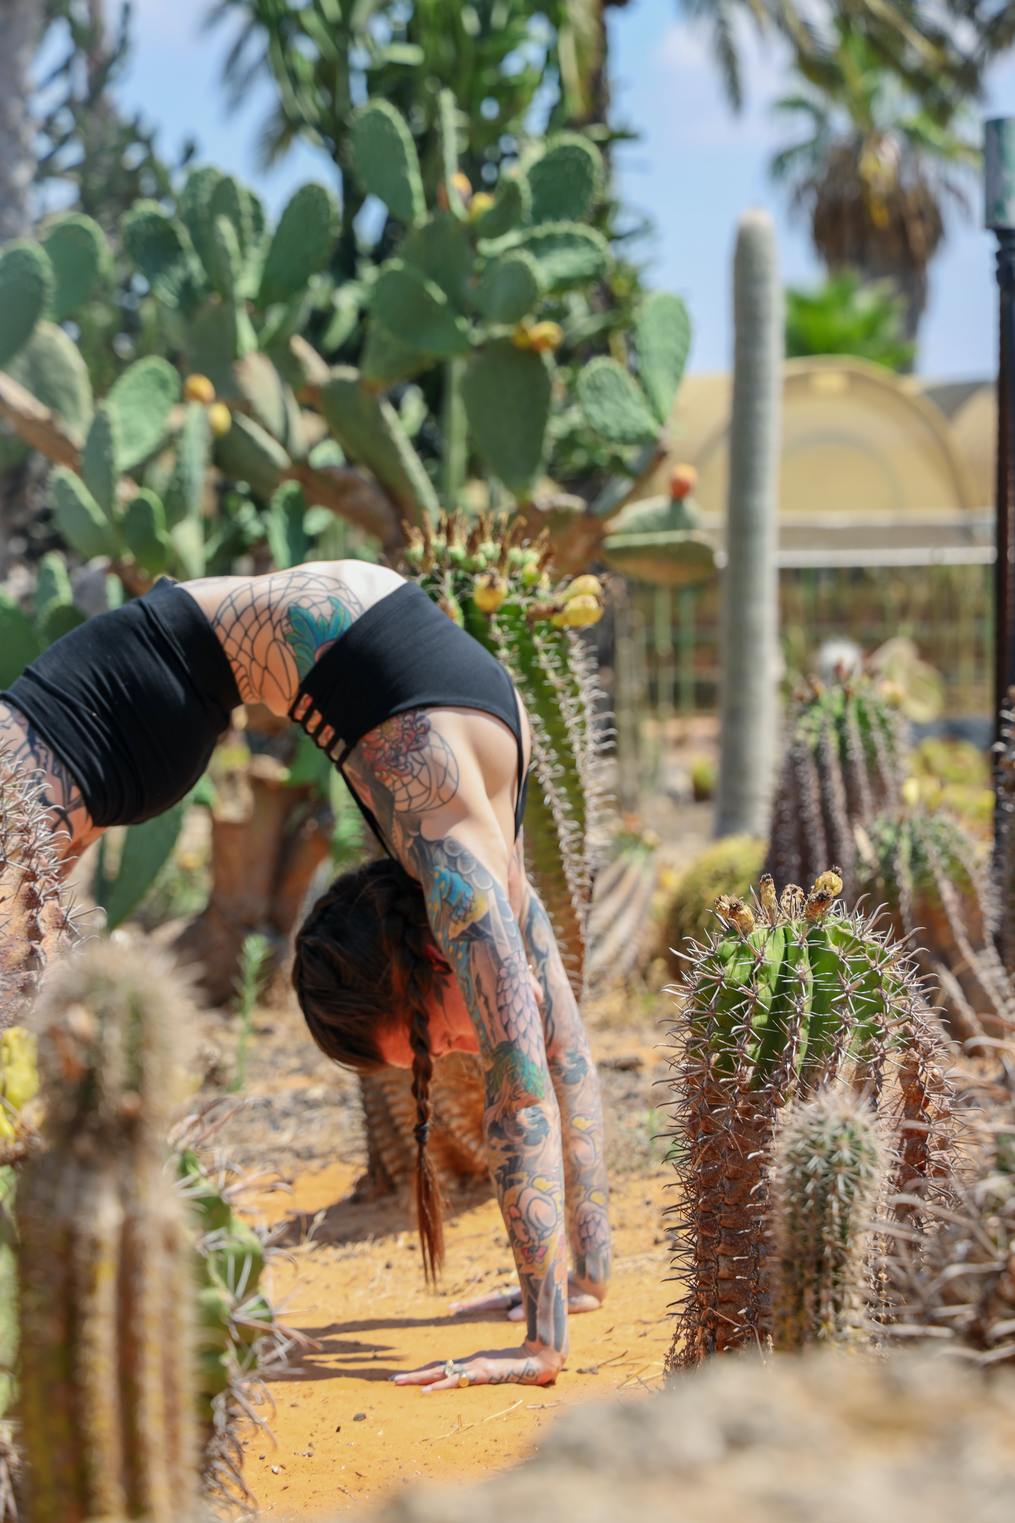 Be-flexible-tattooed-woman-doing-yoga-bridge-pose-tips-for-working-fulltime-and-writing-new-blog-post-how-to-balance-teaching-and-writing-susan-shiney